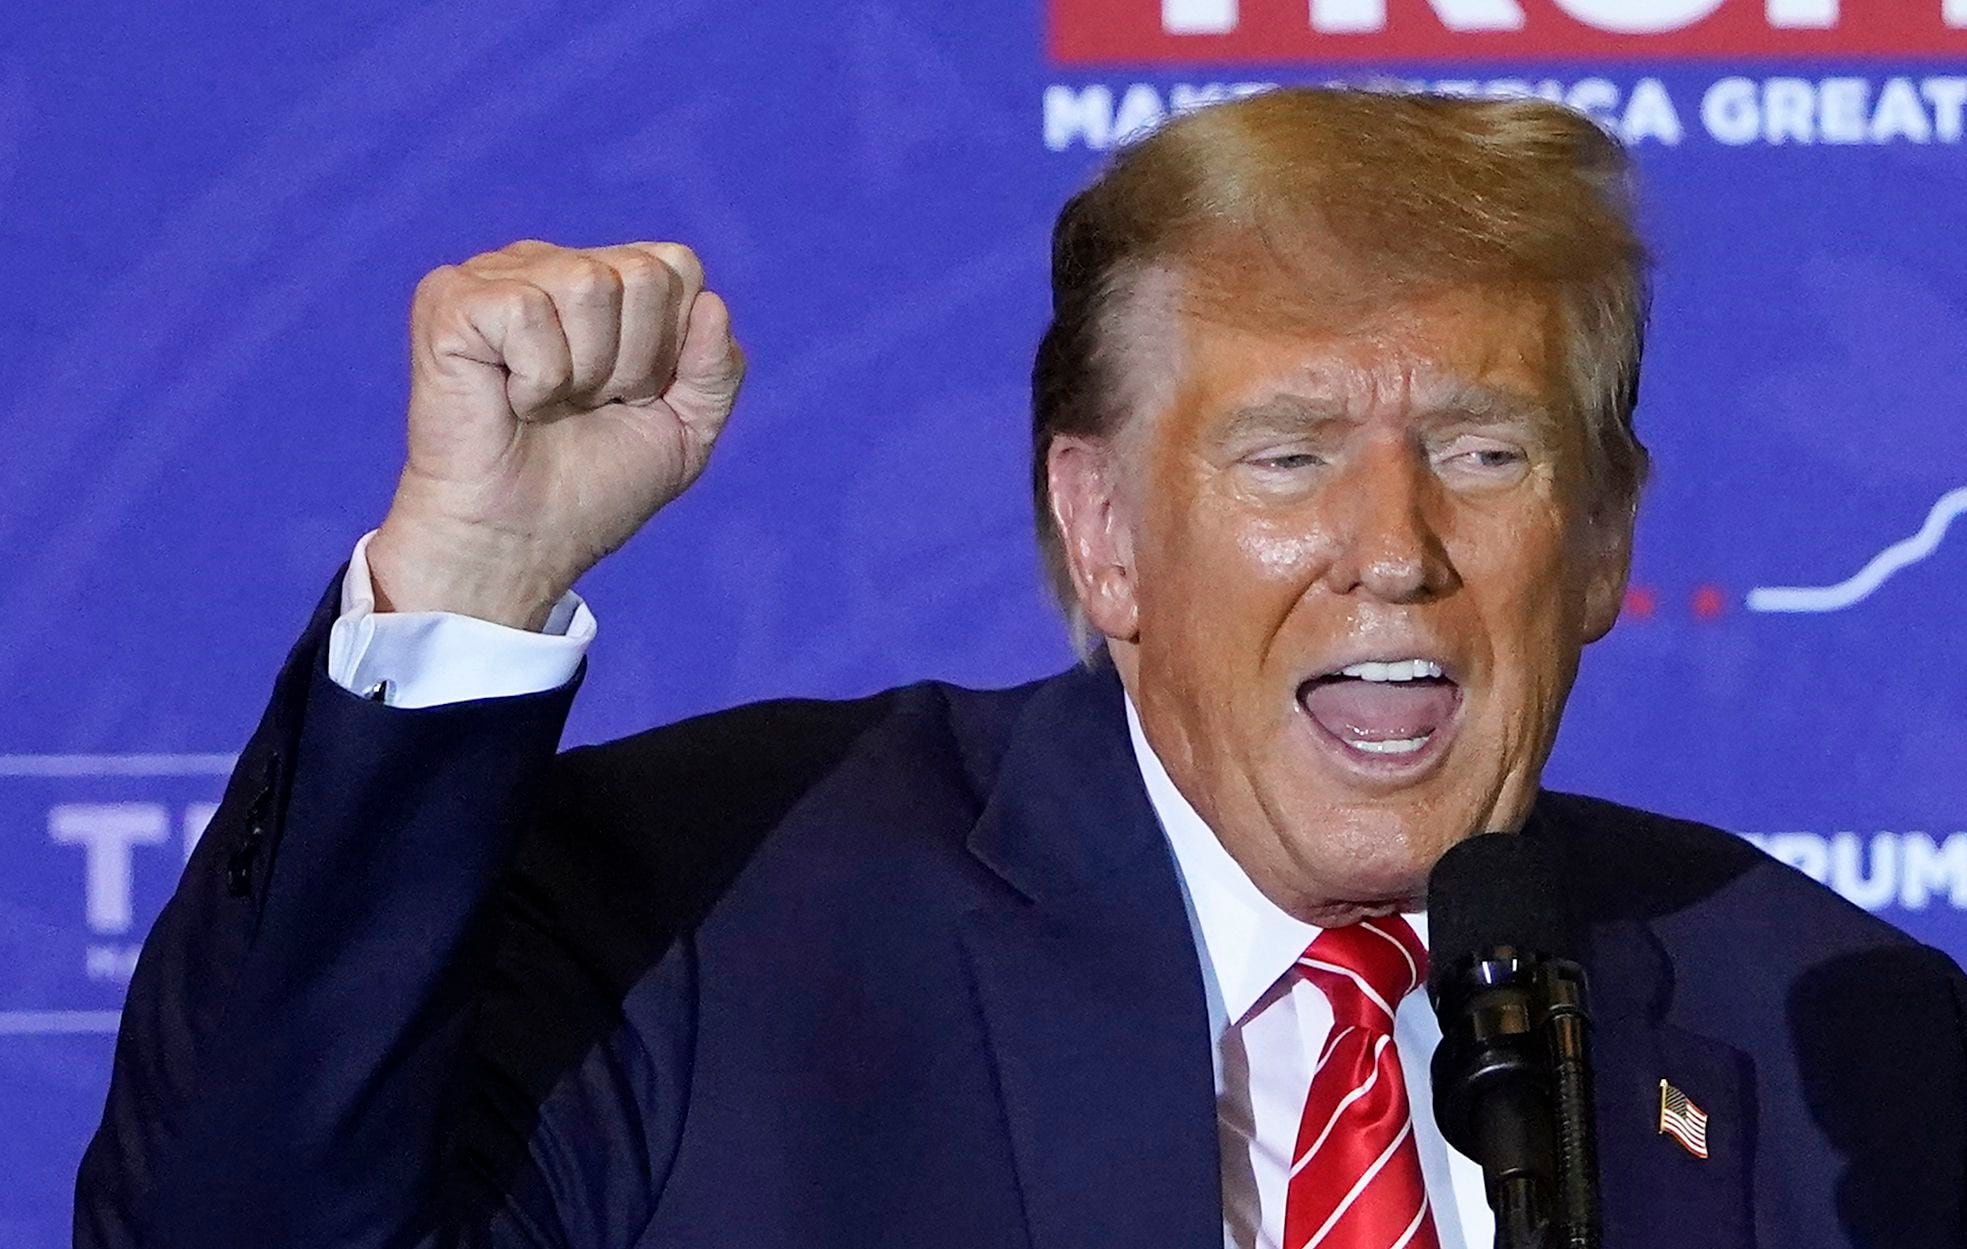 Republican presidential candidate Donald Trump raises his fist while speaking at a campaign event in Concord, New Hampshire, January 19, 2024. (Photo by TIMOTHY A. CLARY/AFP).